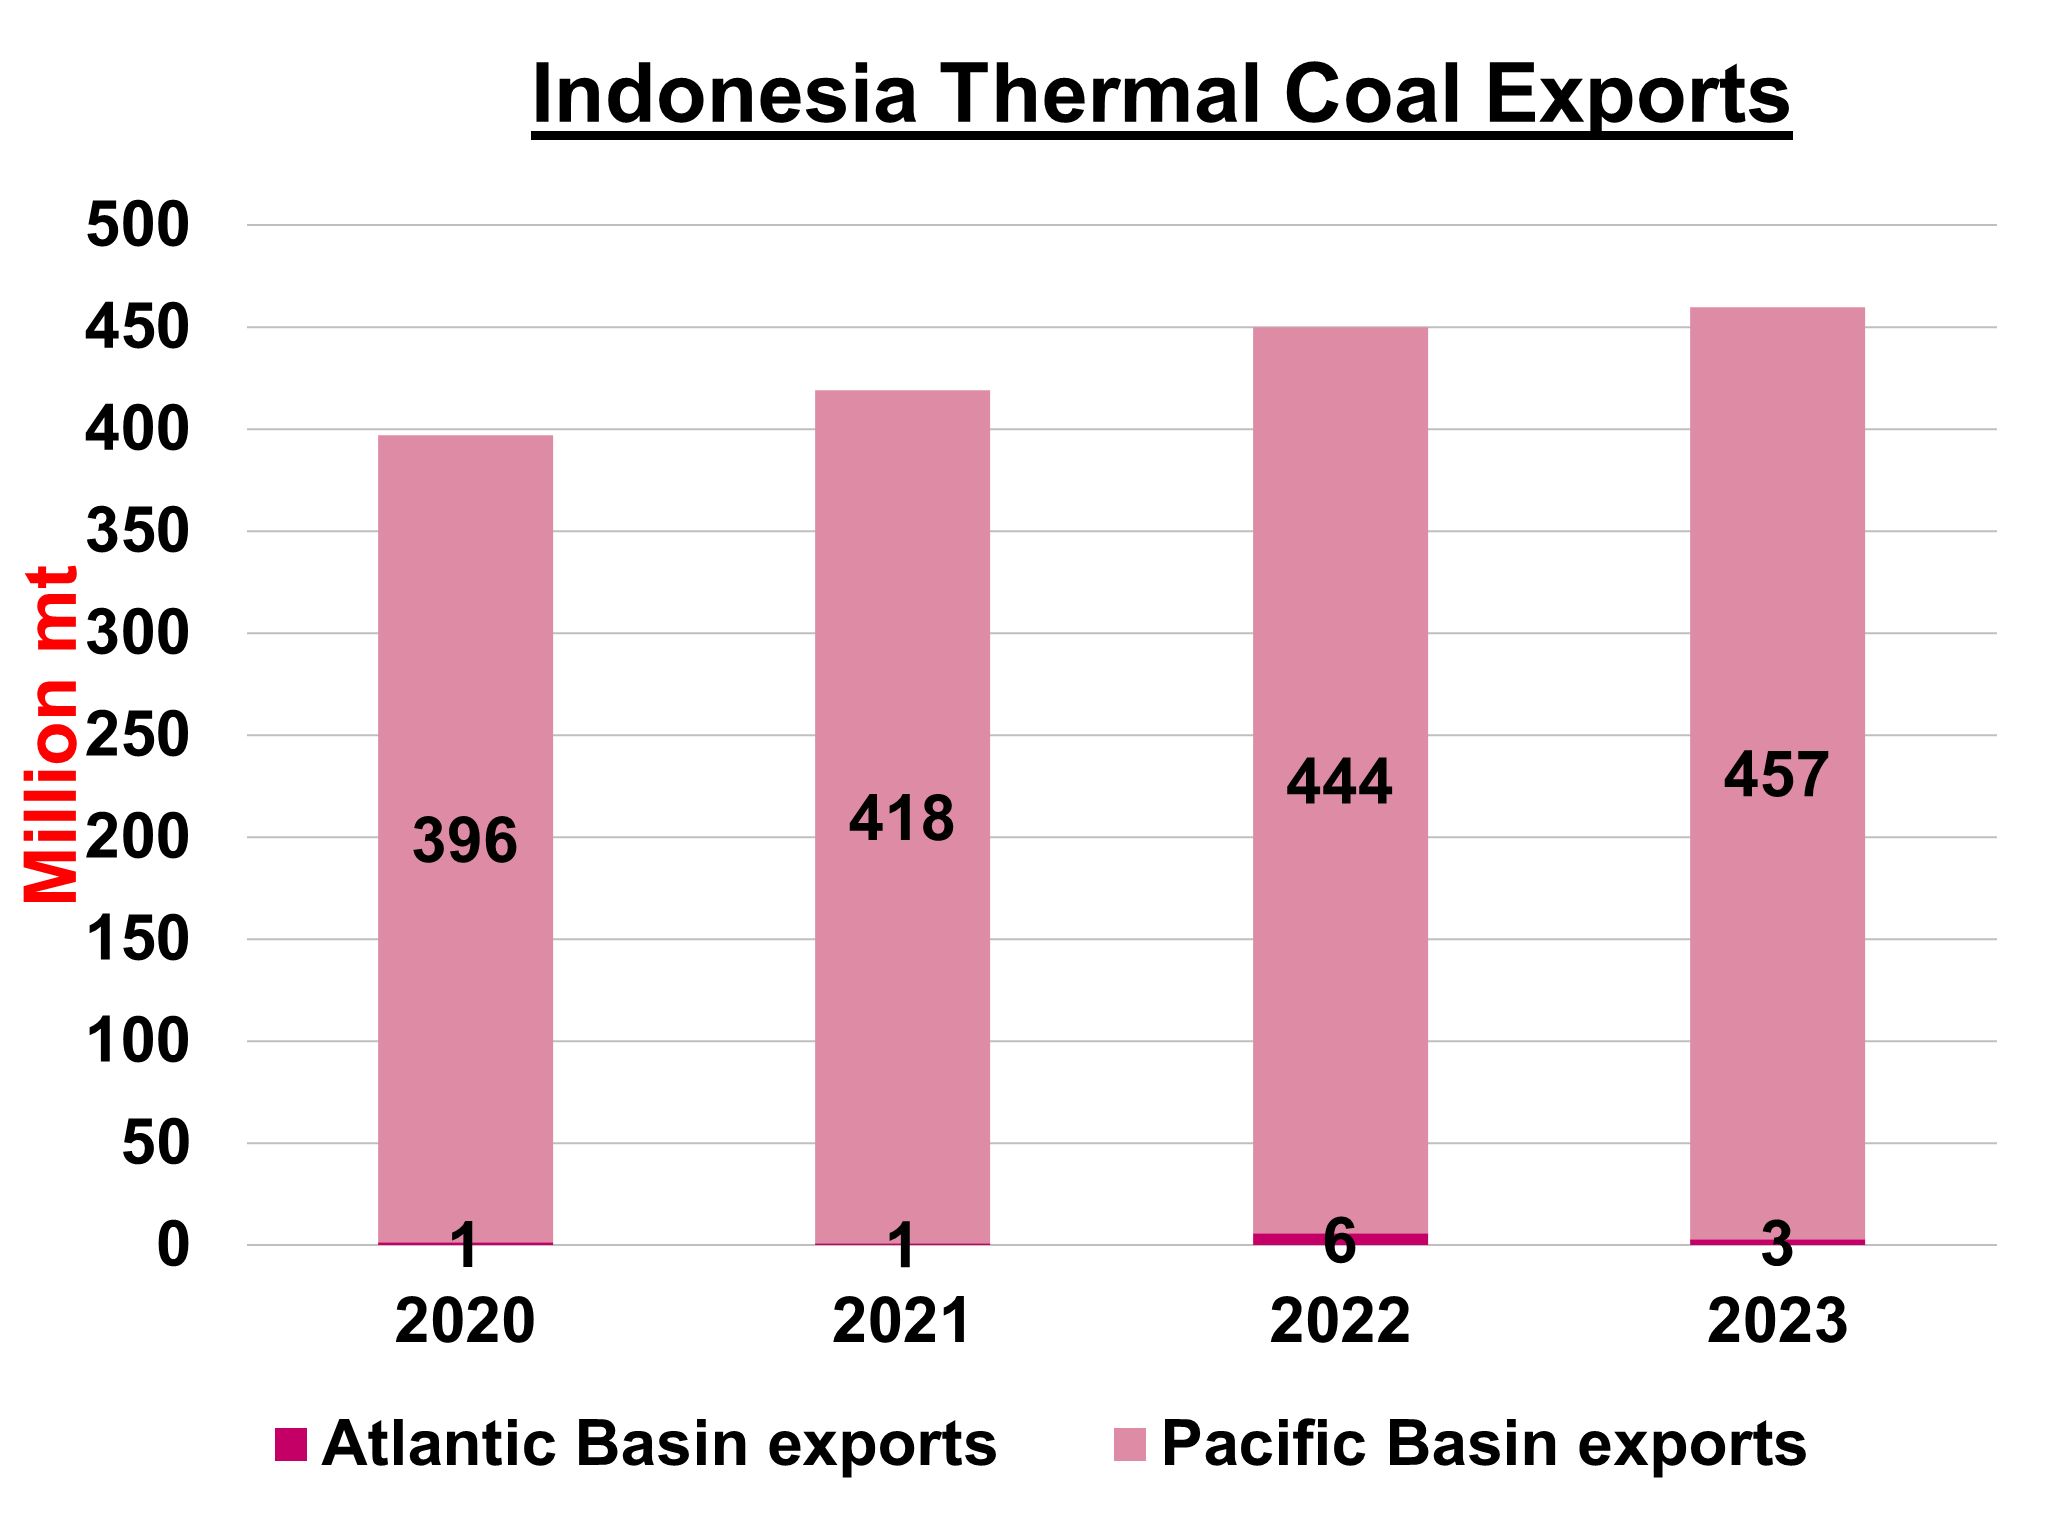 Indonesia thermal coal exports